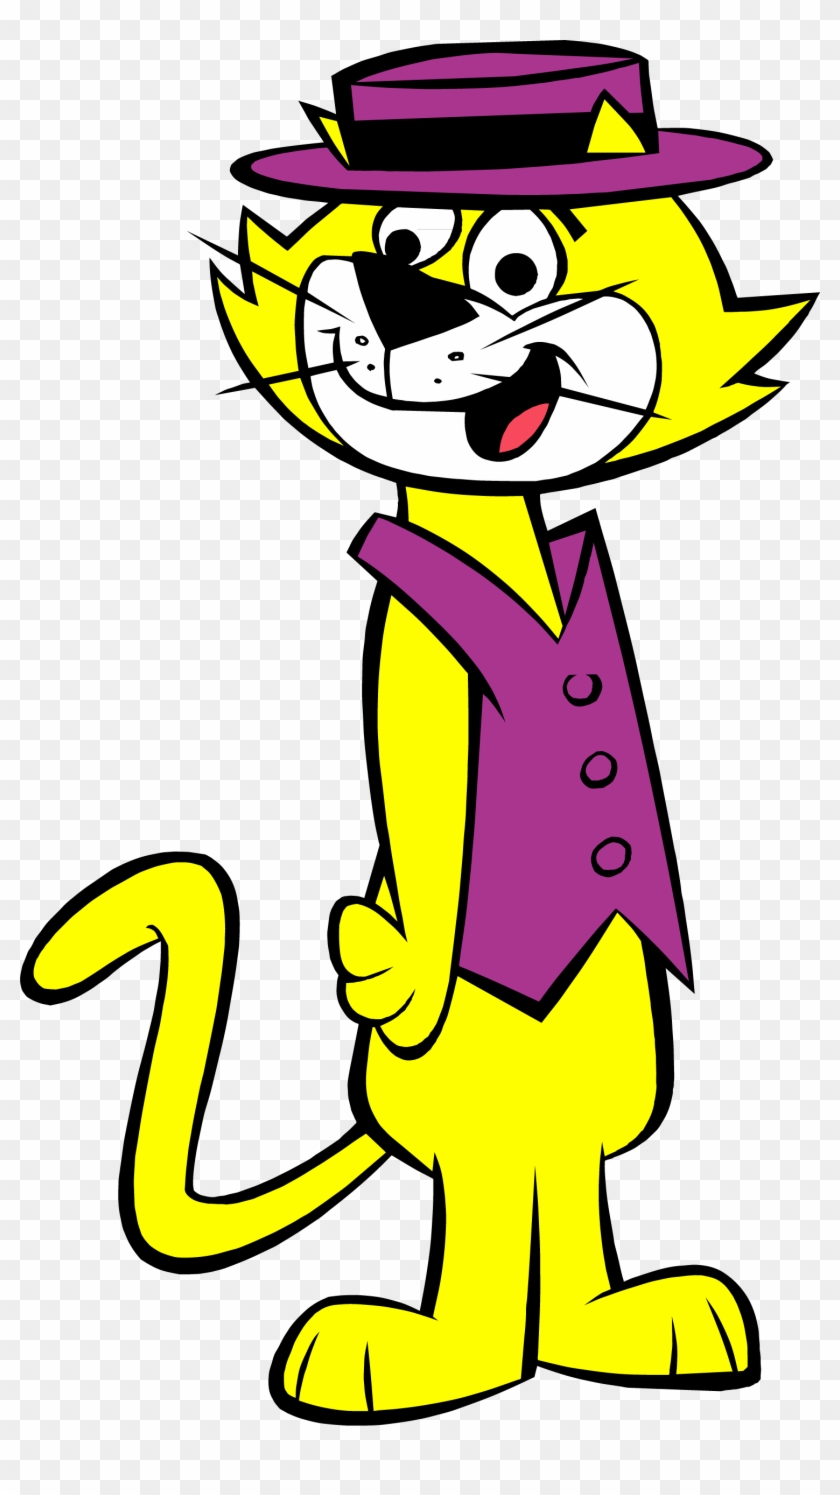 Immediately Most Famous Cartoon Character Greatest Top Cat